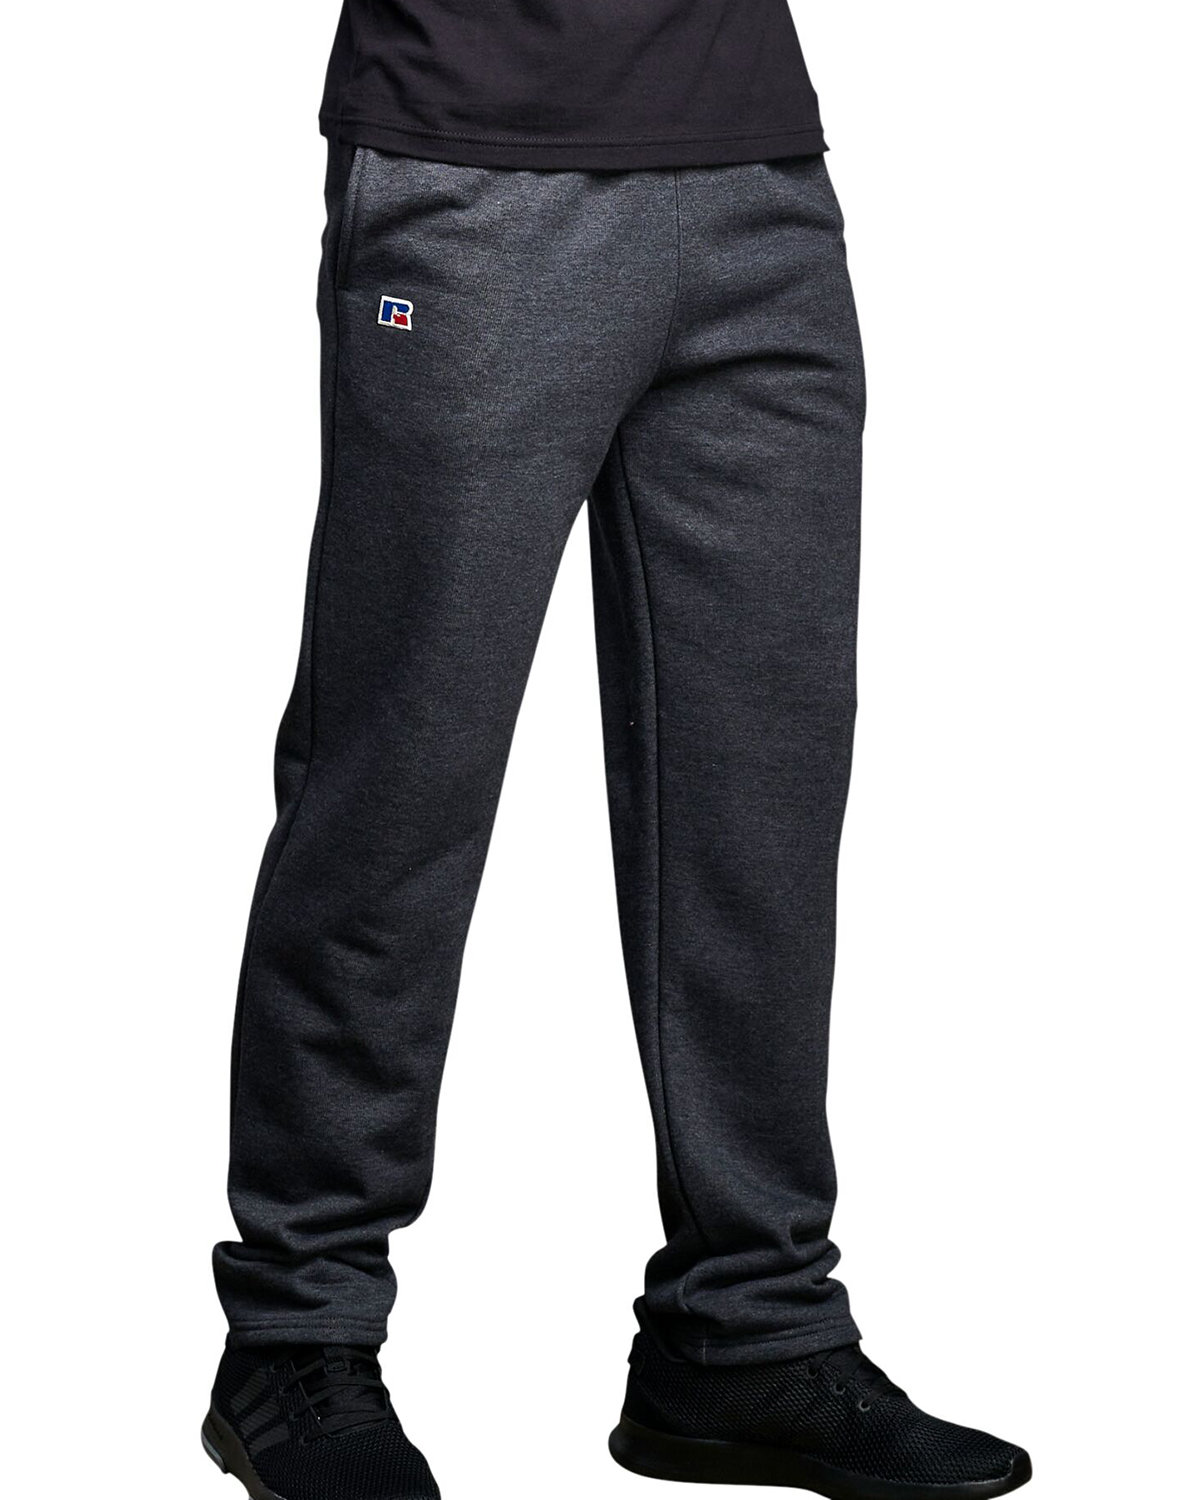 https://images.shirtspace.com/fullsize/yCn4If6EgB8nULFBeluToQ%3D%3D/398475/17413-russell-athletic-82ansm-cotton-rich-open-bottom-sweatpants-front-charcoal-heather.jpg